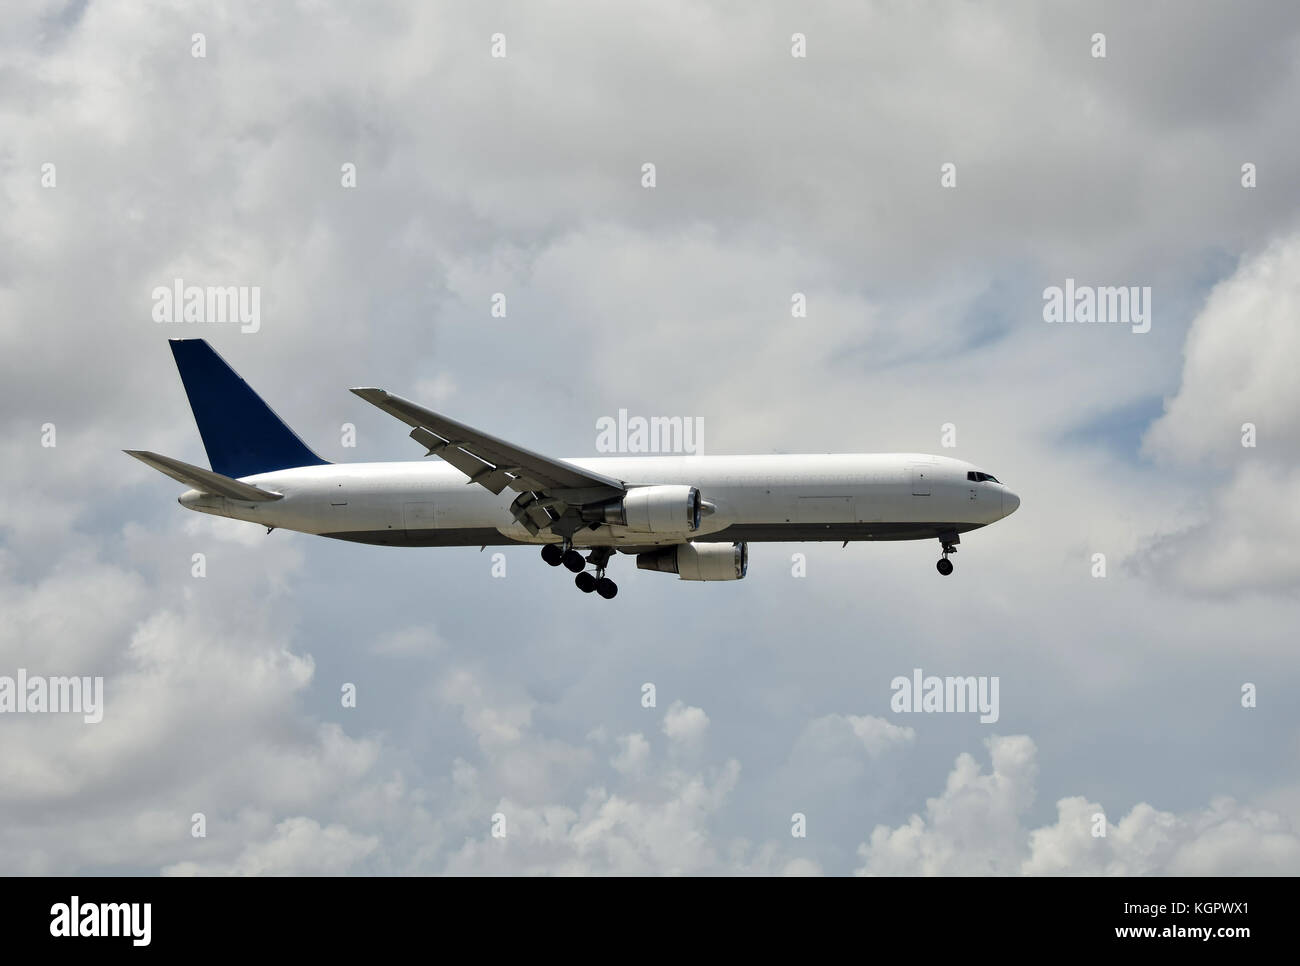 Cargo jet airplane in flight side view Stock Photo